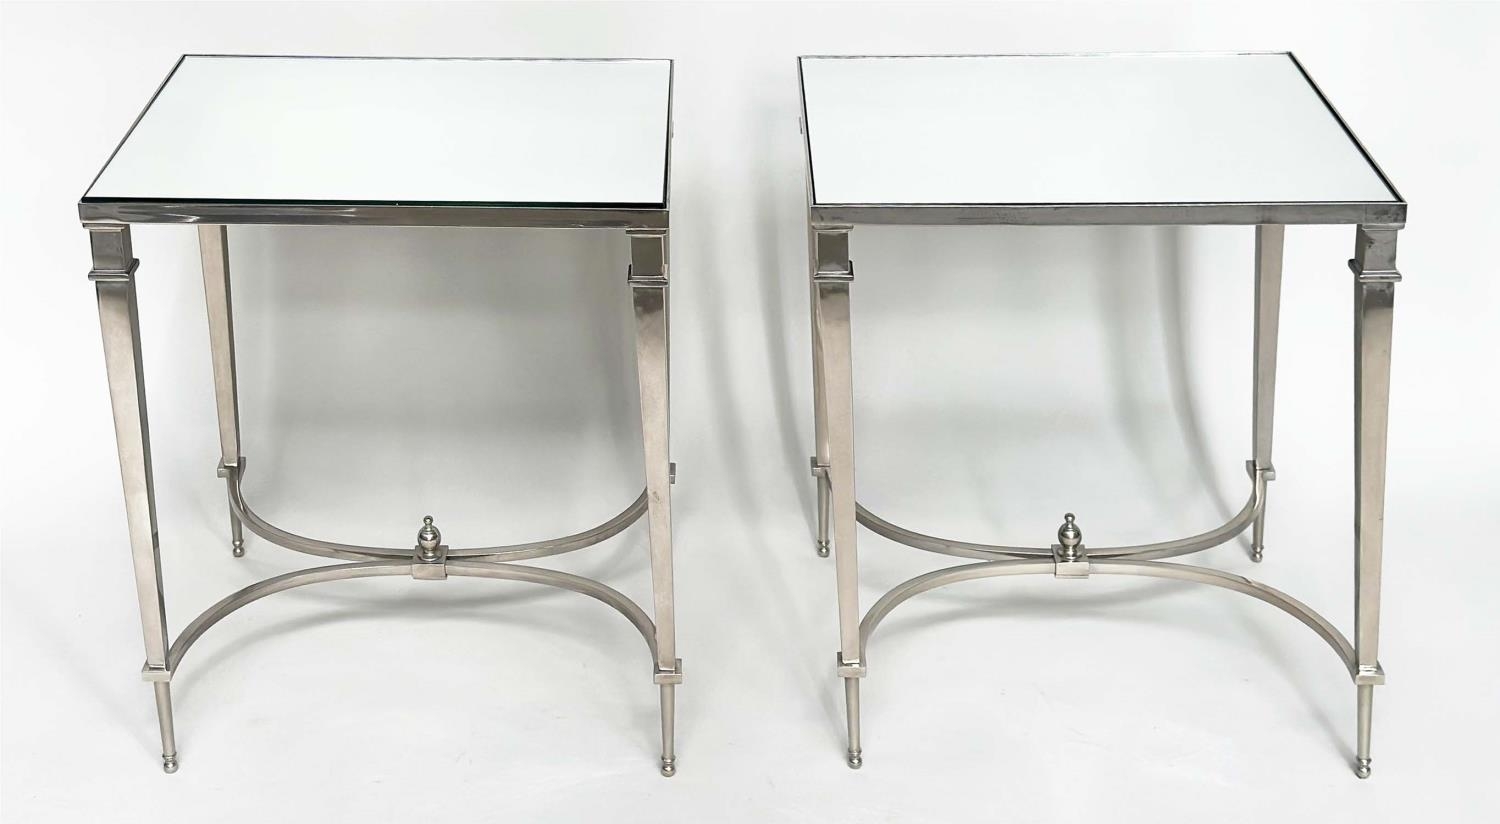 LAMP TABLES, a pair, Regency style rectangular mirror topped with tapering chromium stretchered